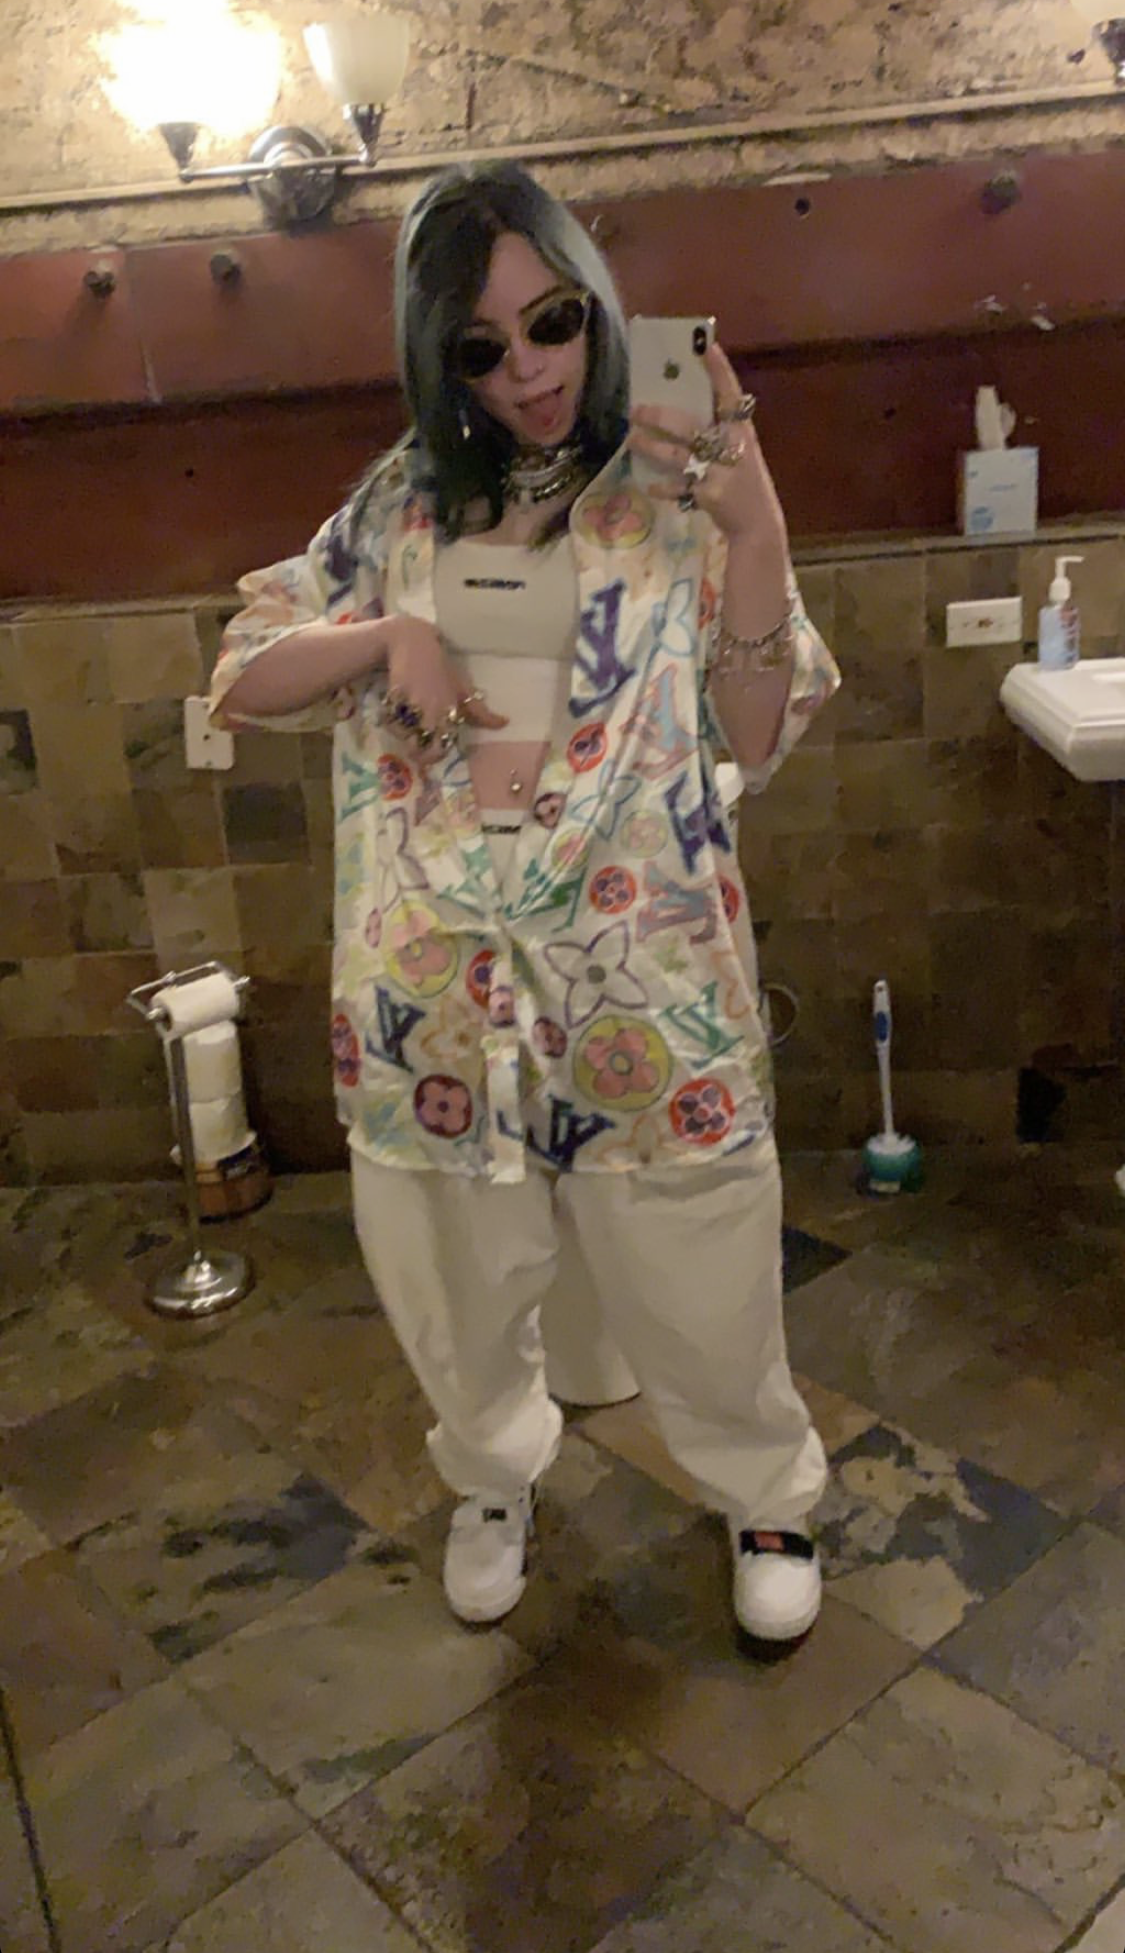 Billie Eilish Decked Out in Louis Vuitton, What the Fashion